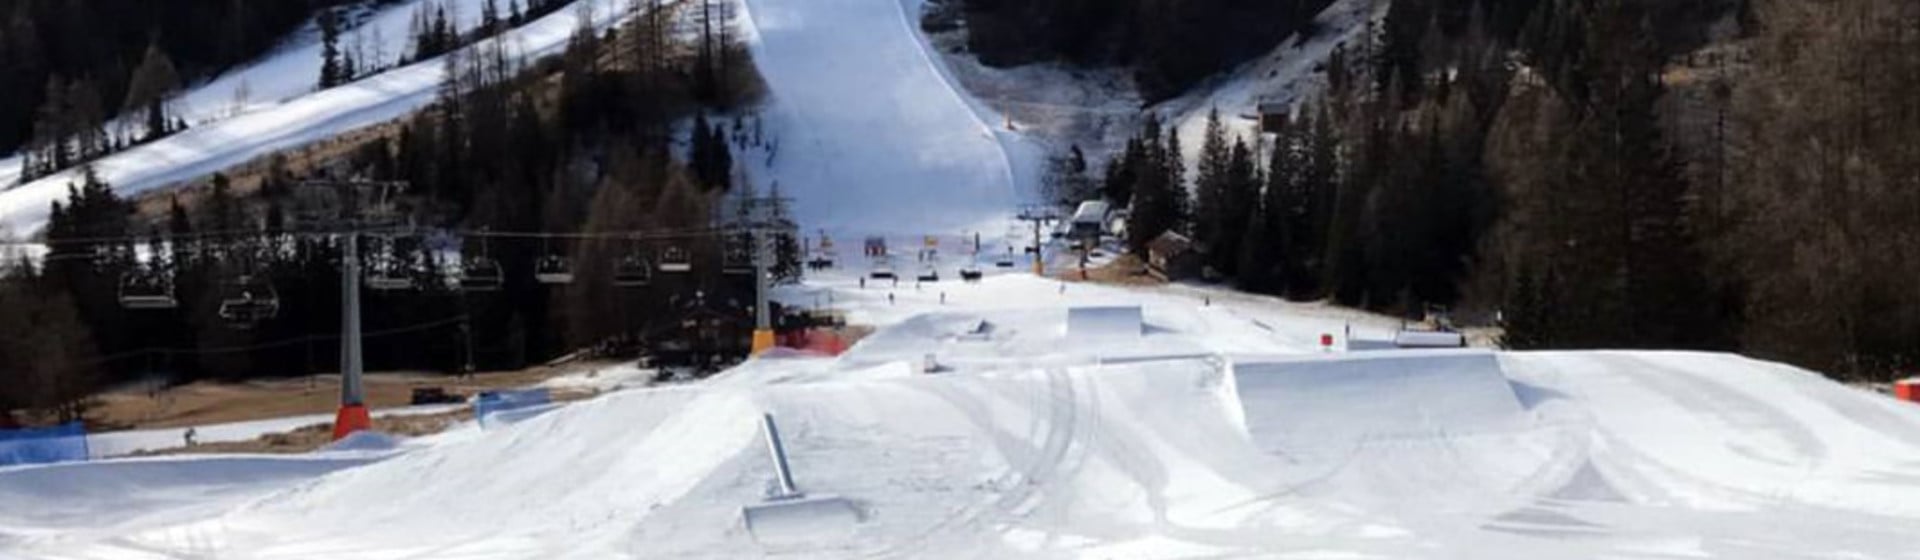 SNOWPARK: The Arabba SuperPark is now open